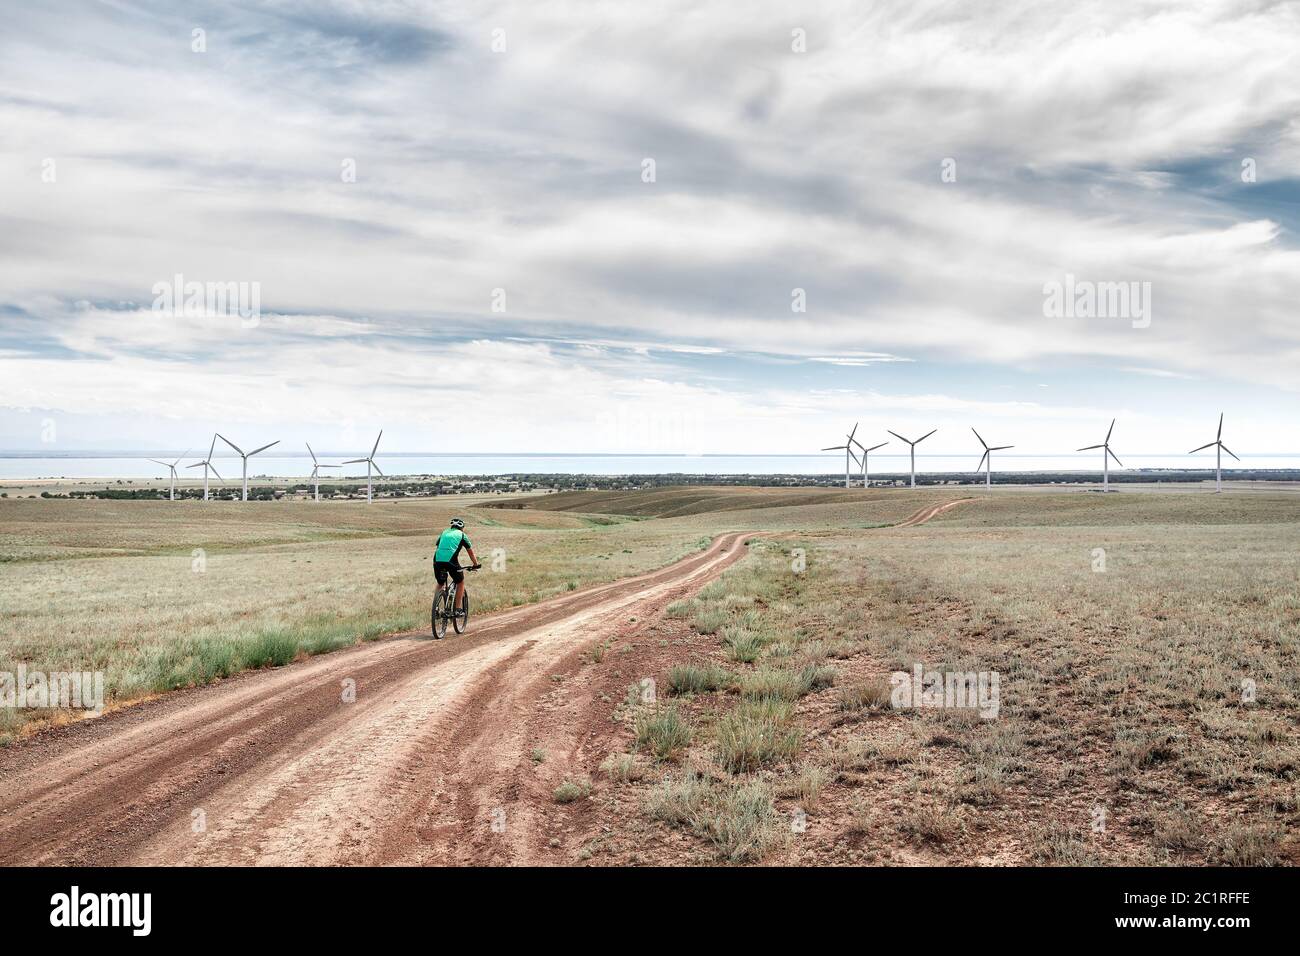 Man on mountain bike rides on the road to the wind turbines farm near the lake Against blue cloudy sky. Ecological and zero waste lifestyle concepts. Stock Photo